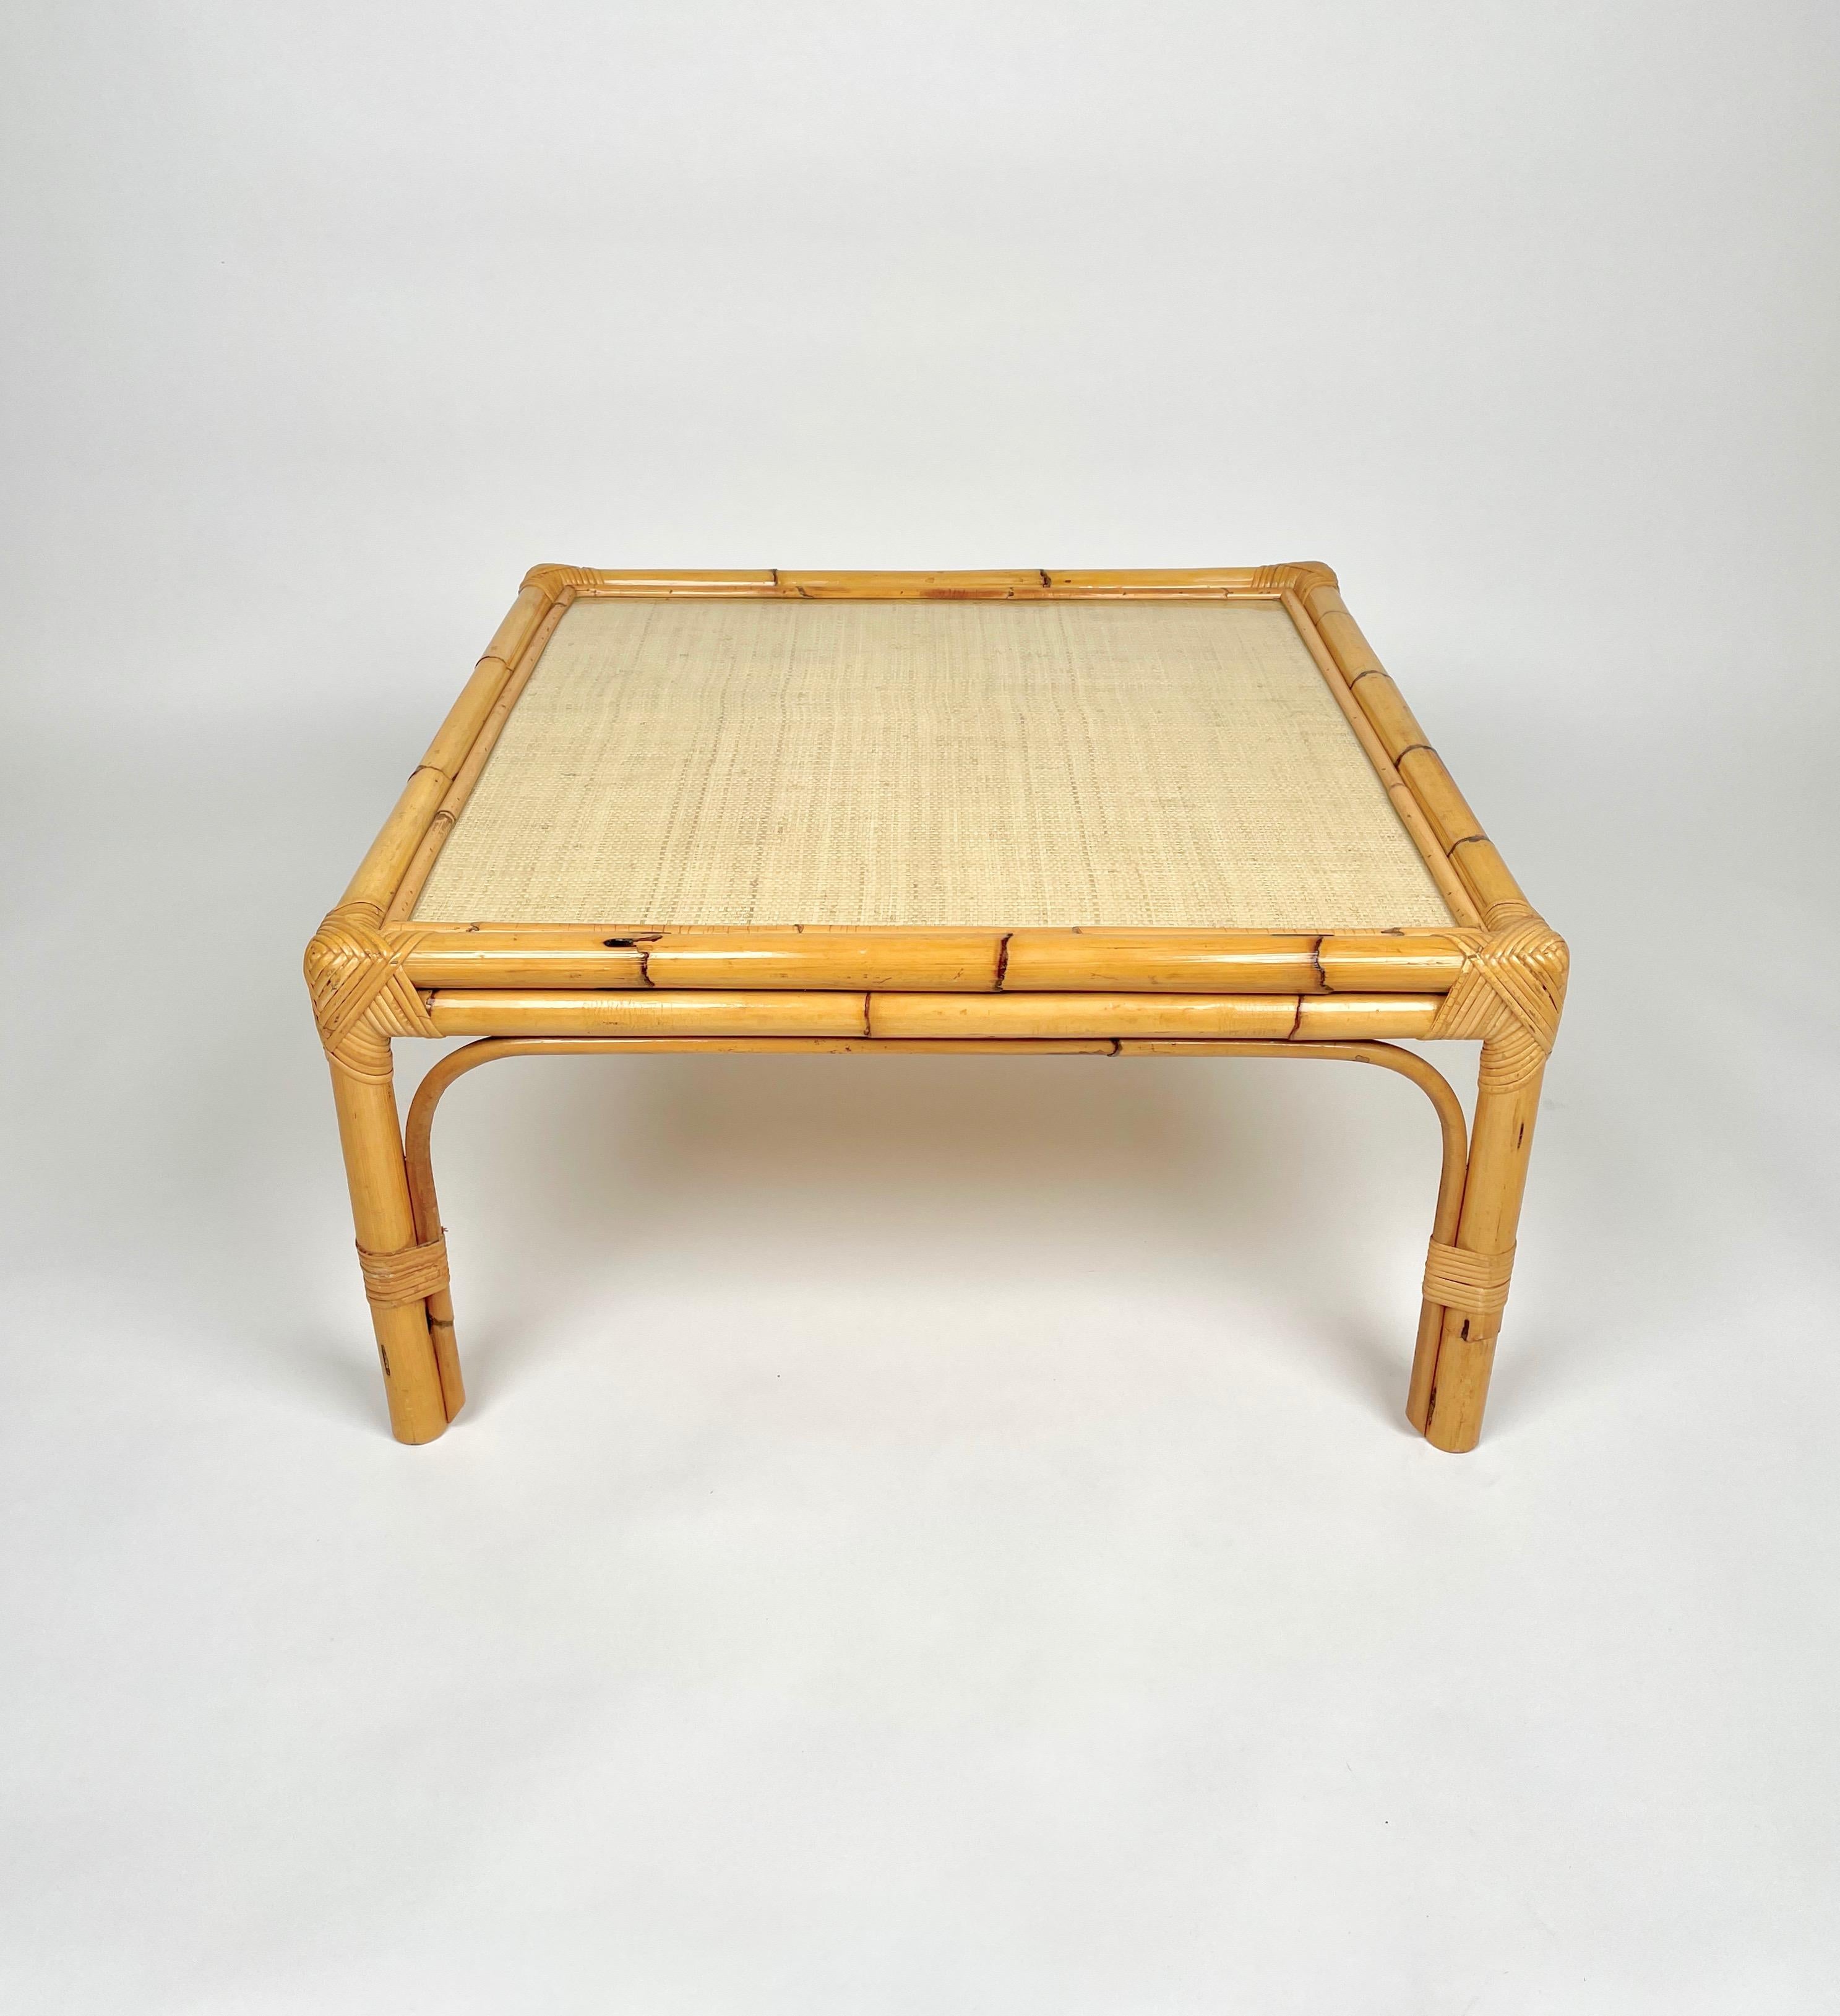 Mid-20th Century Bamboo, Rattan & Wicker Squared Coffee Table, Italy, 1960s For Sale